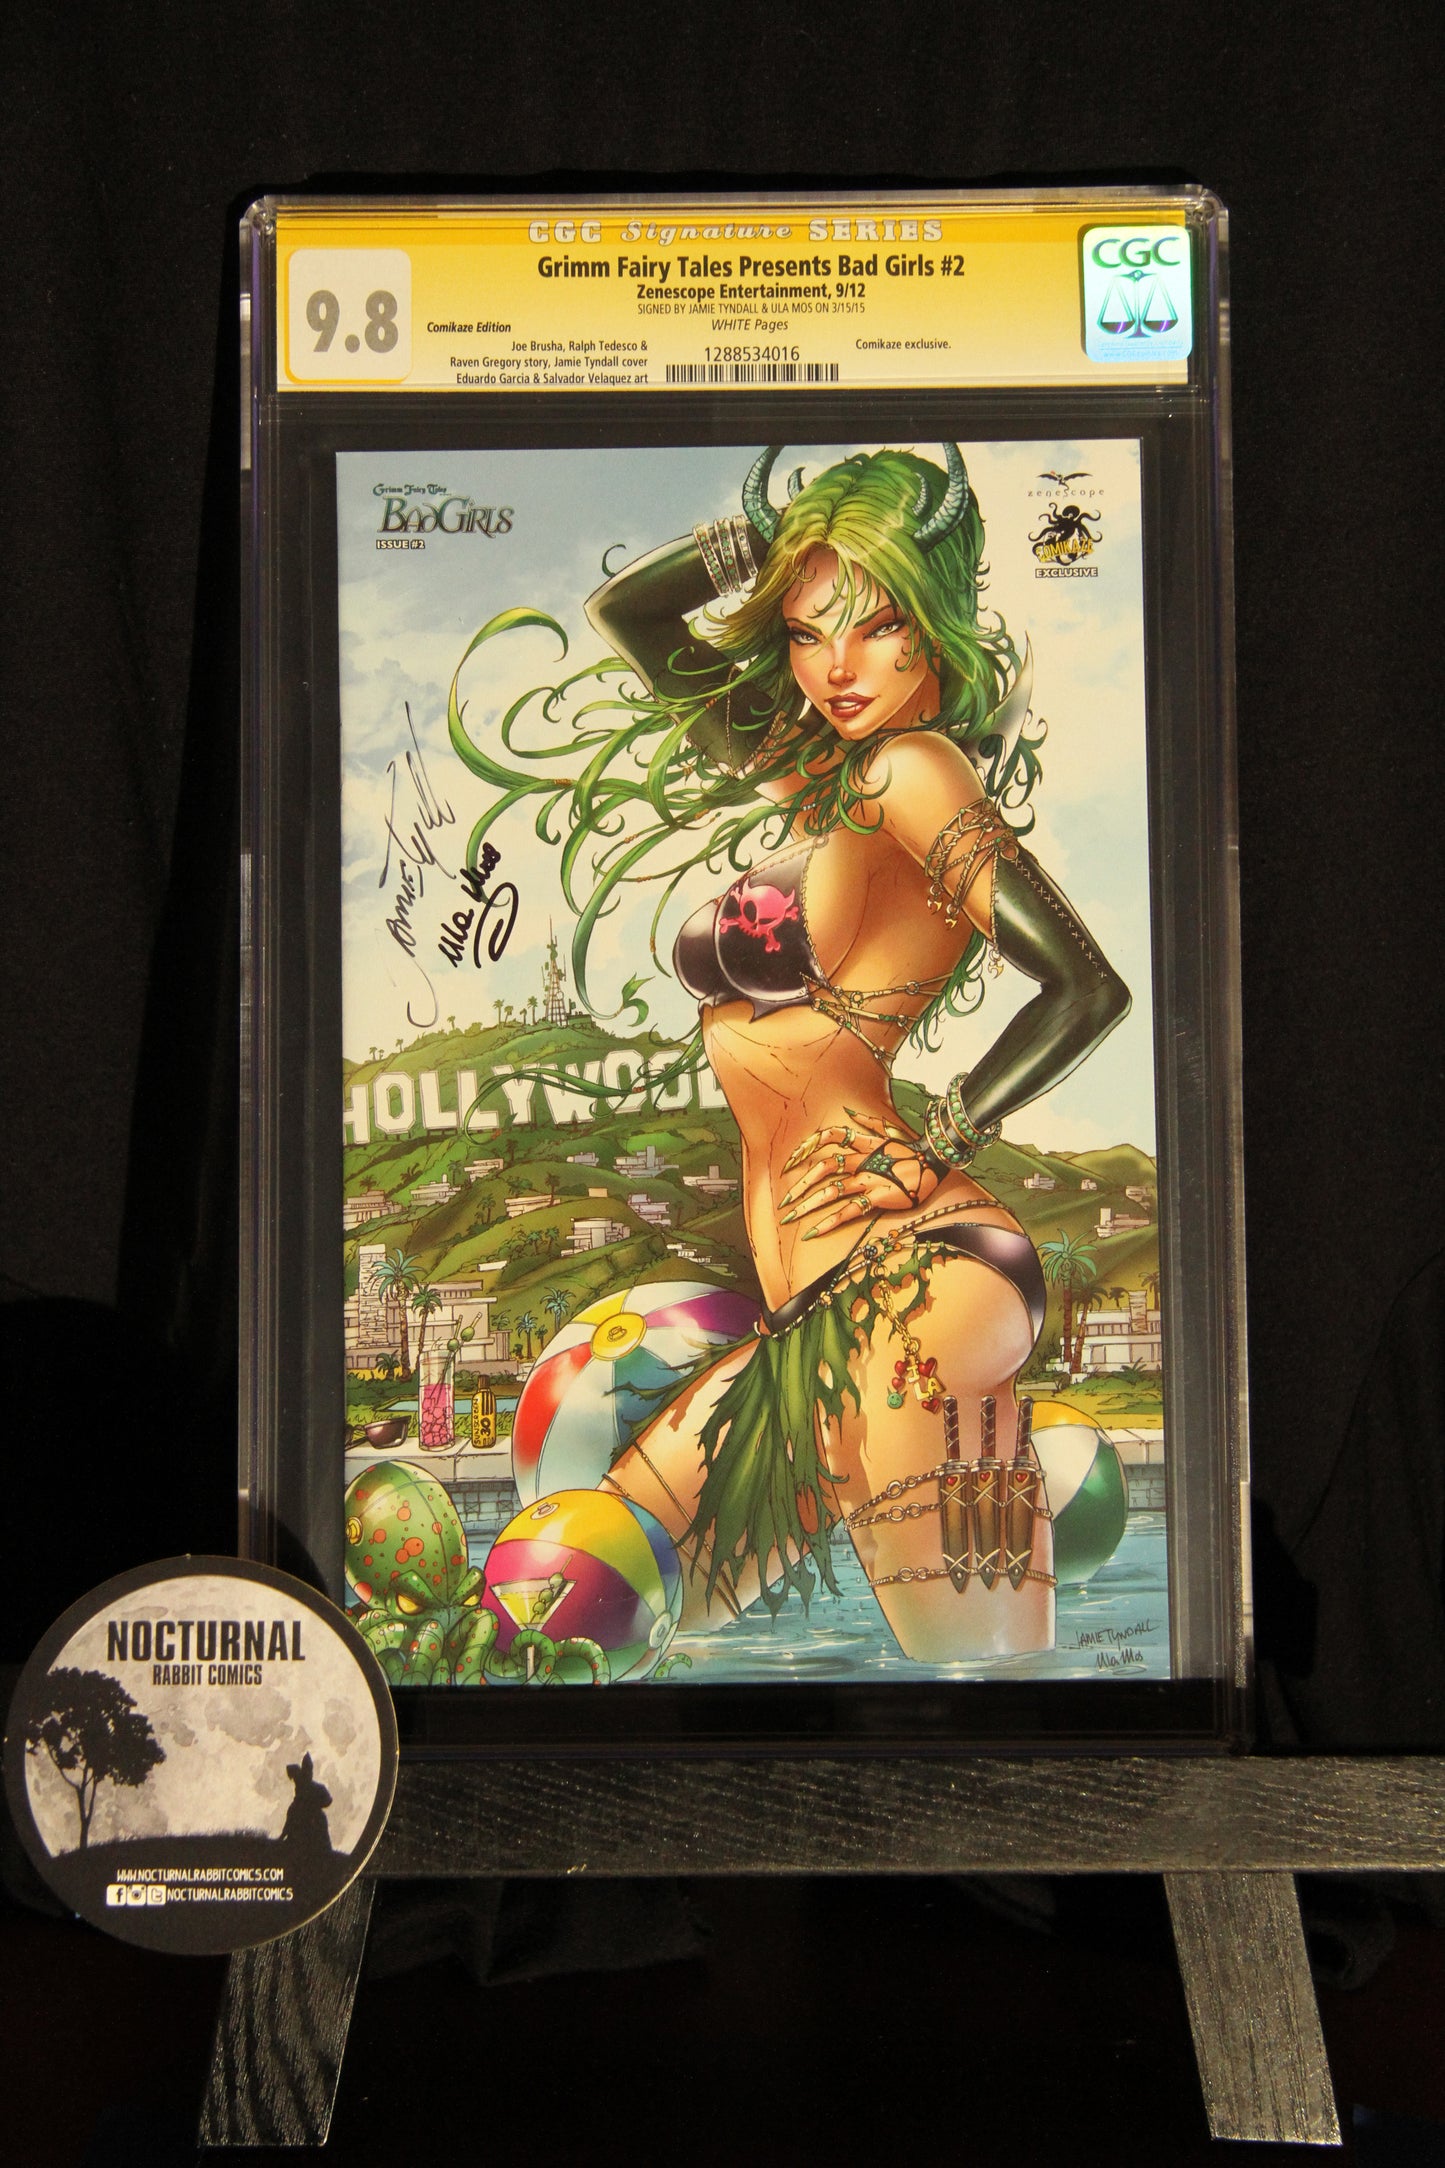 Grimm Fairy Tales Bad Girls 32 9.8 CGC Double Signed Tyndall/Ula Mos